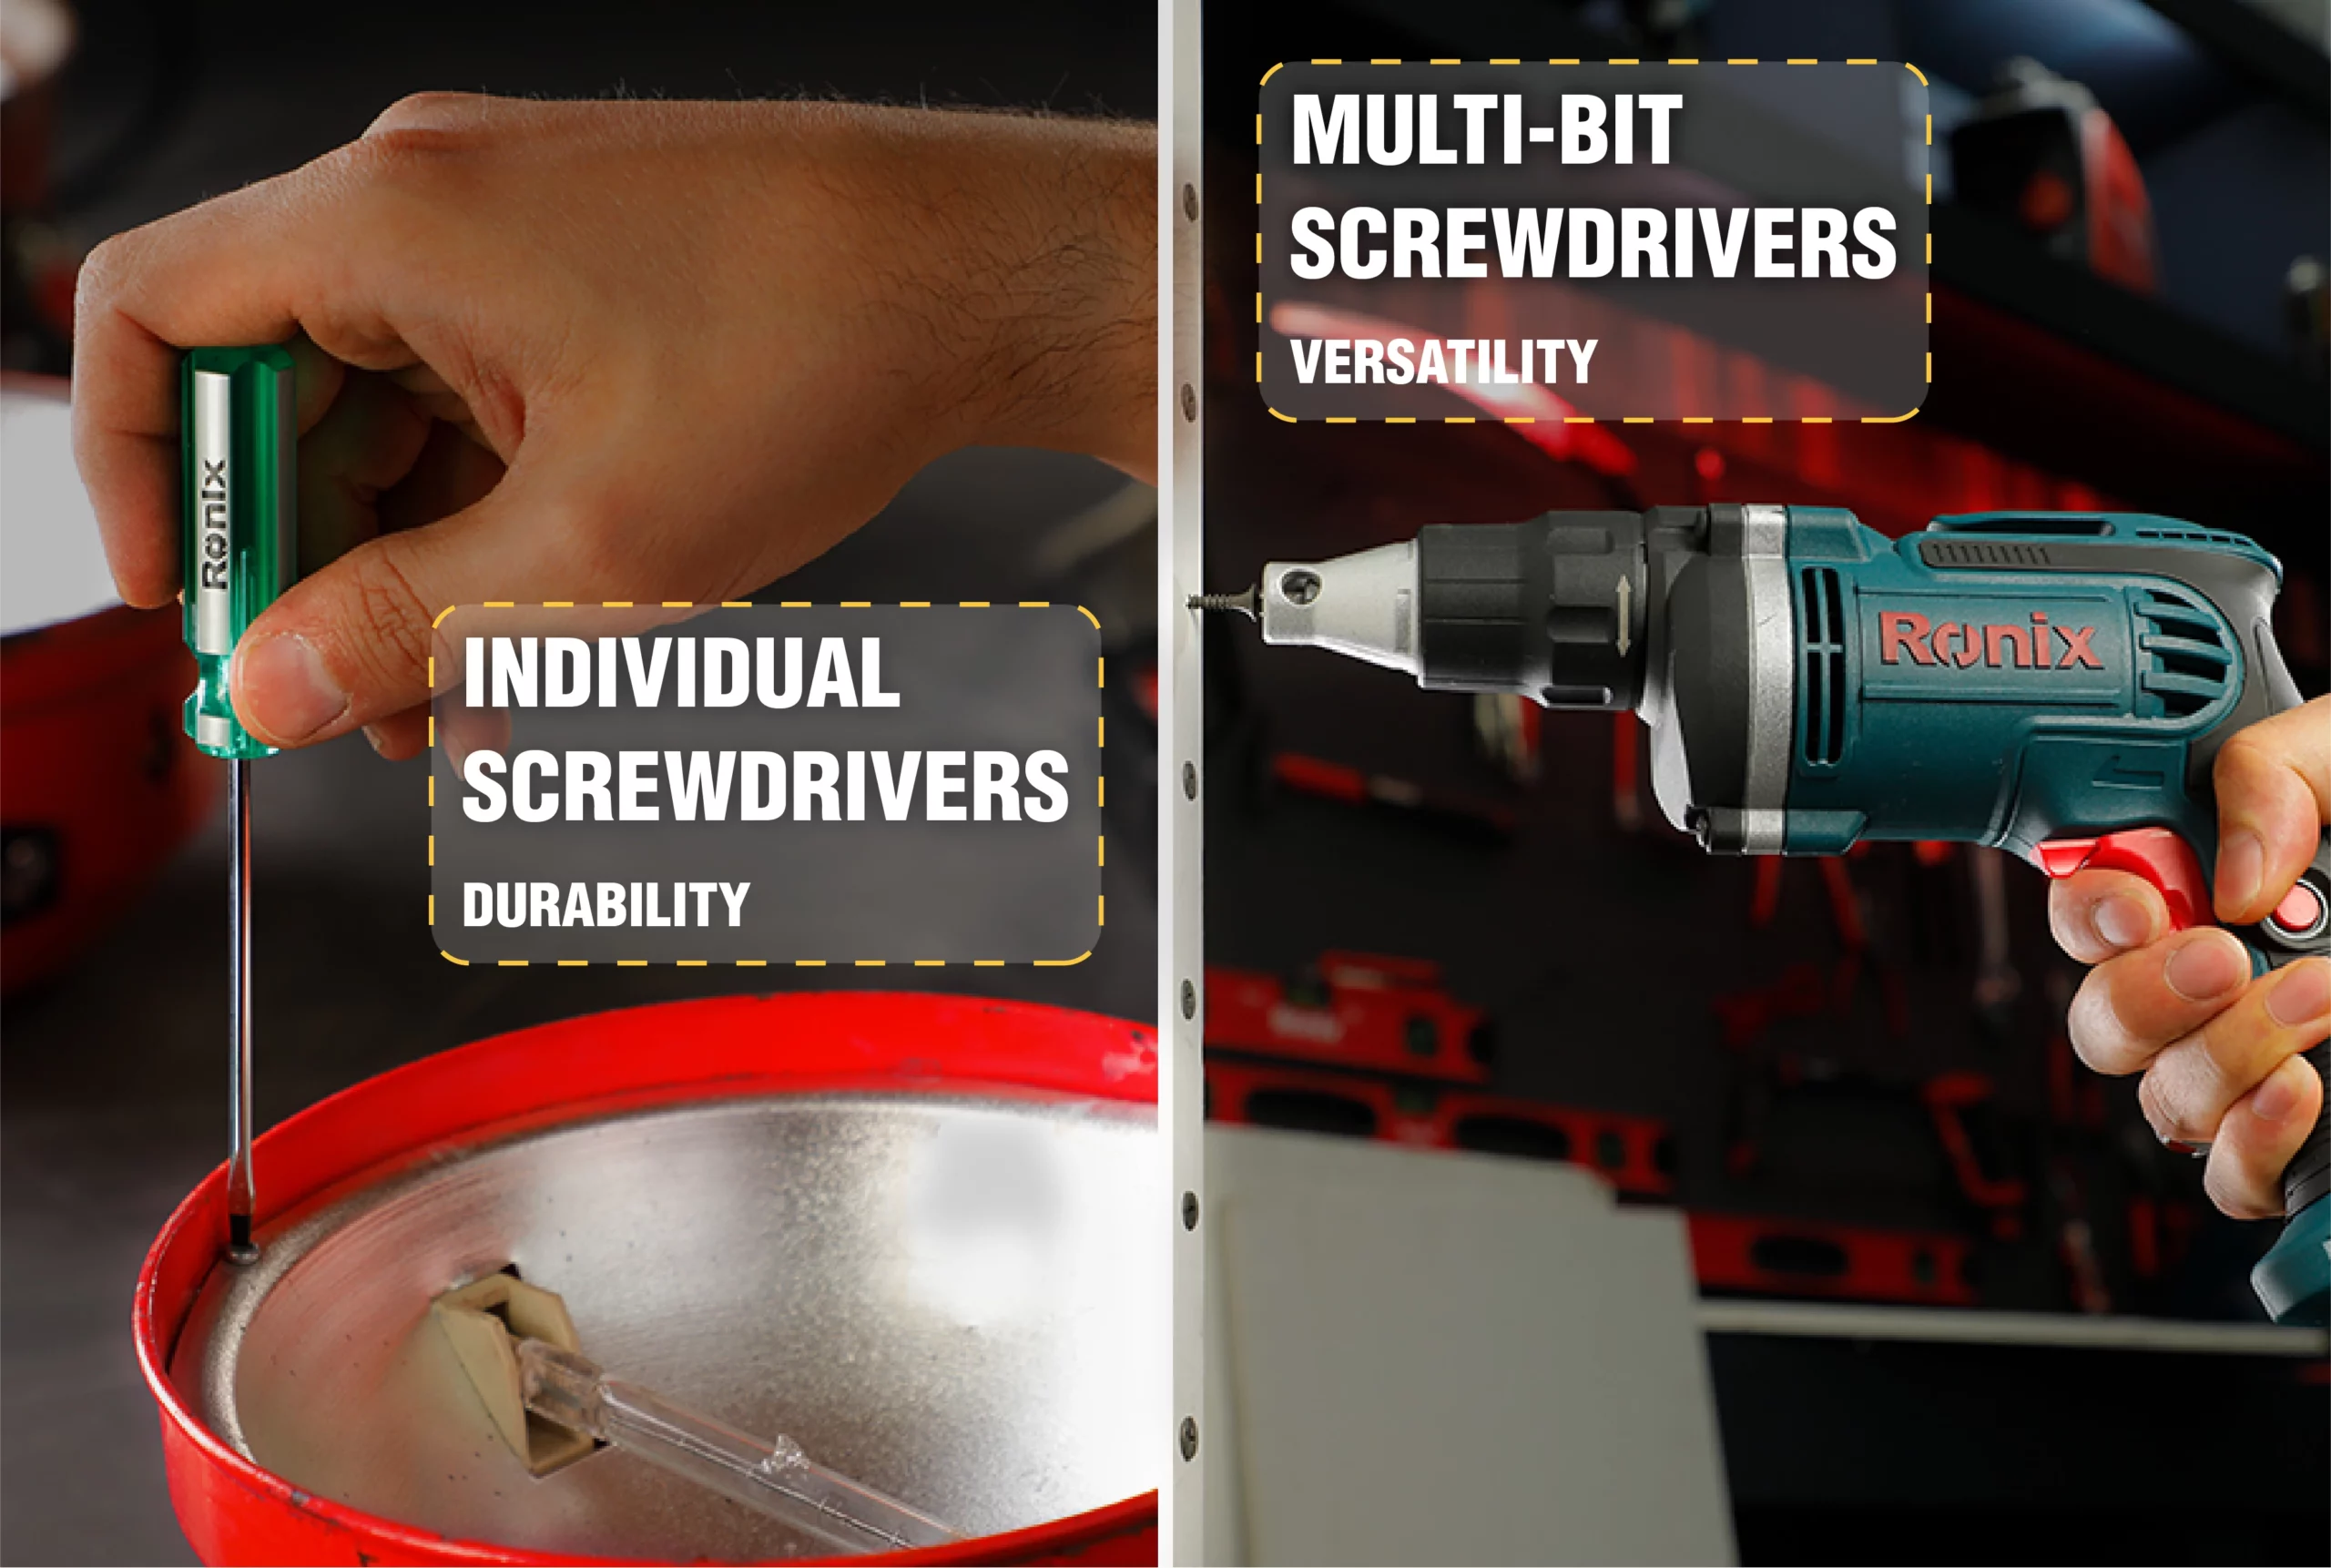 An infographic comparing individual and multi-bit screwdrivers